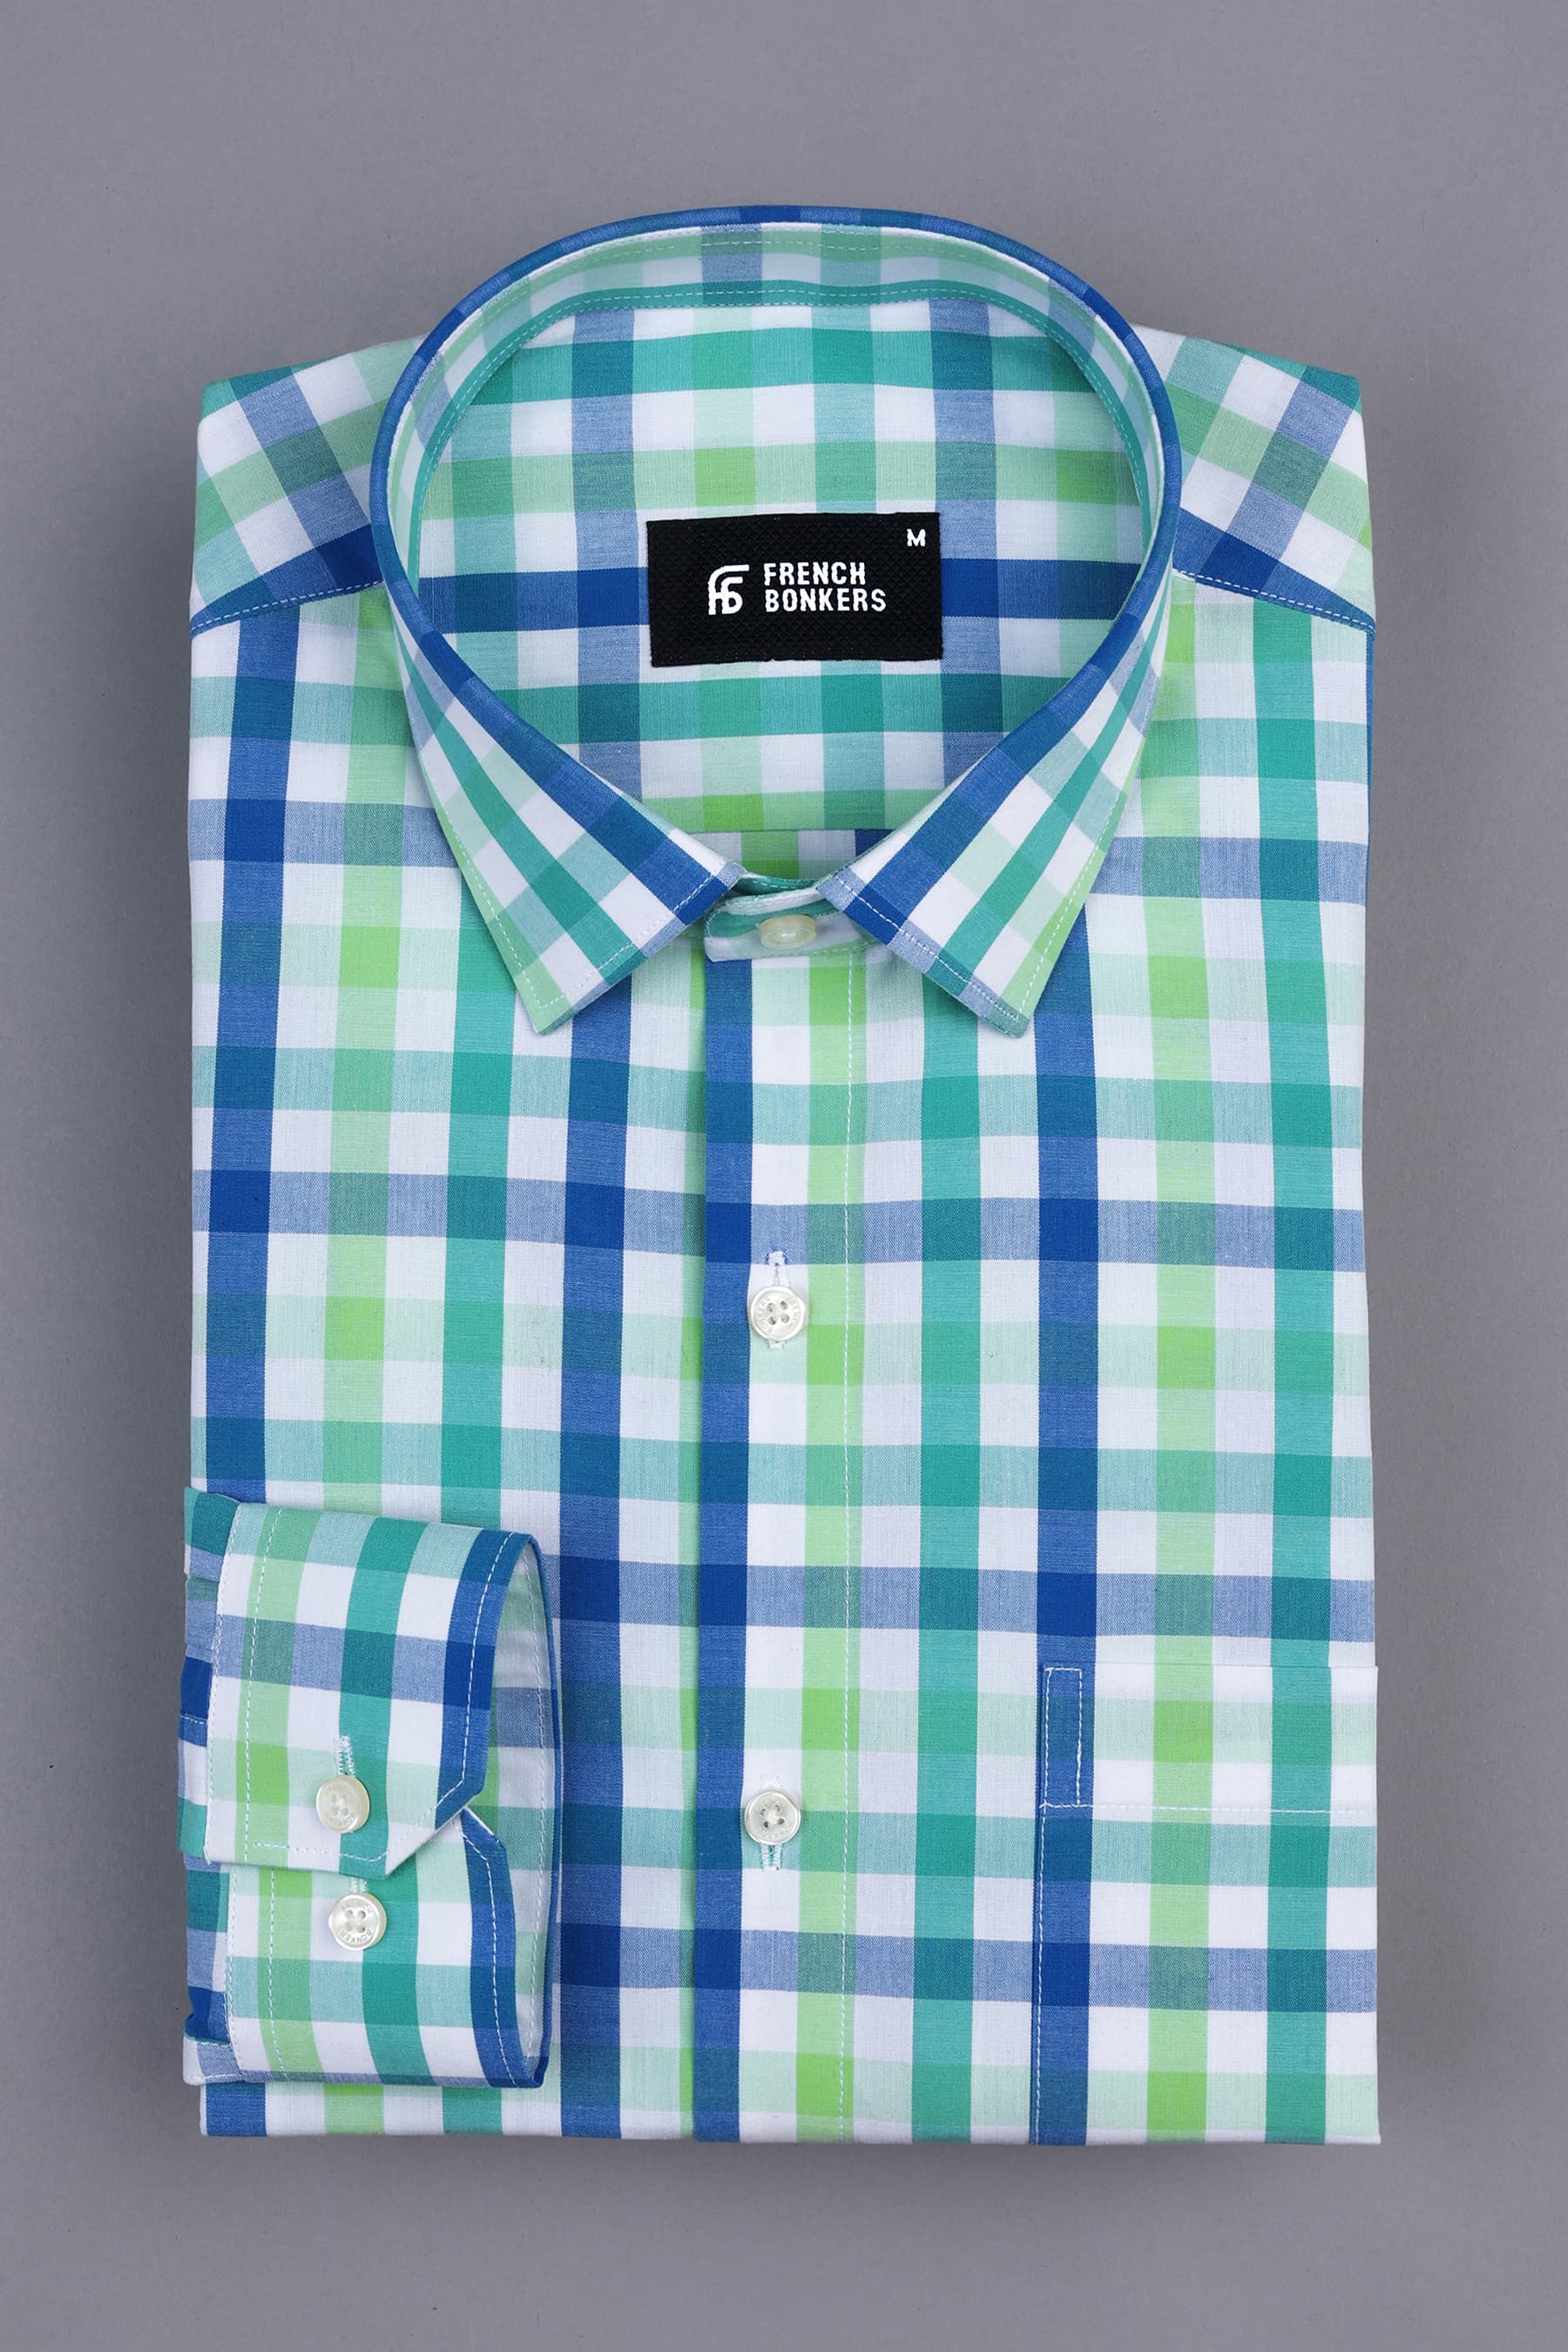 Parrot and leaf green with blue windowpane regular plaid check shirt